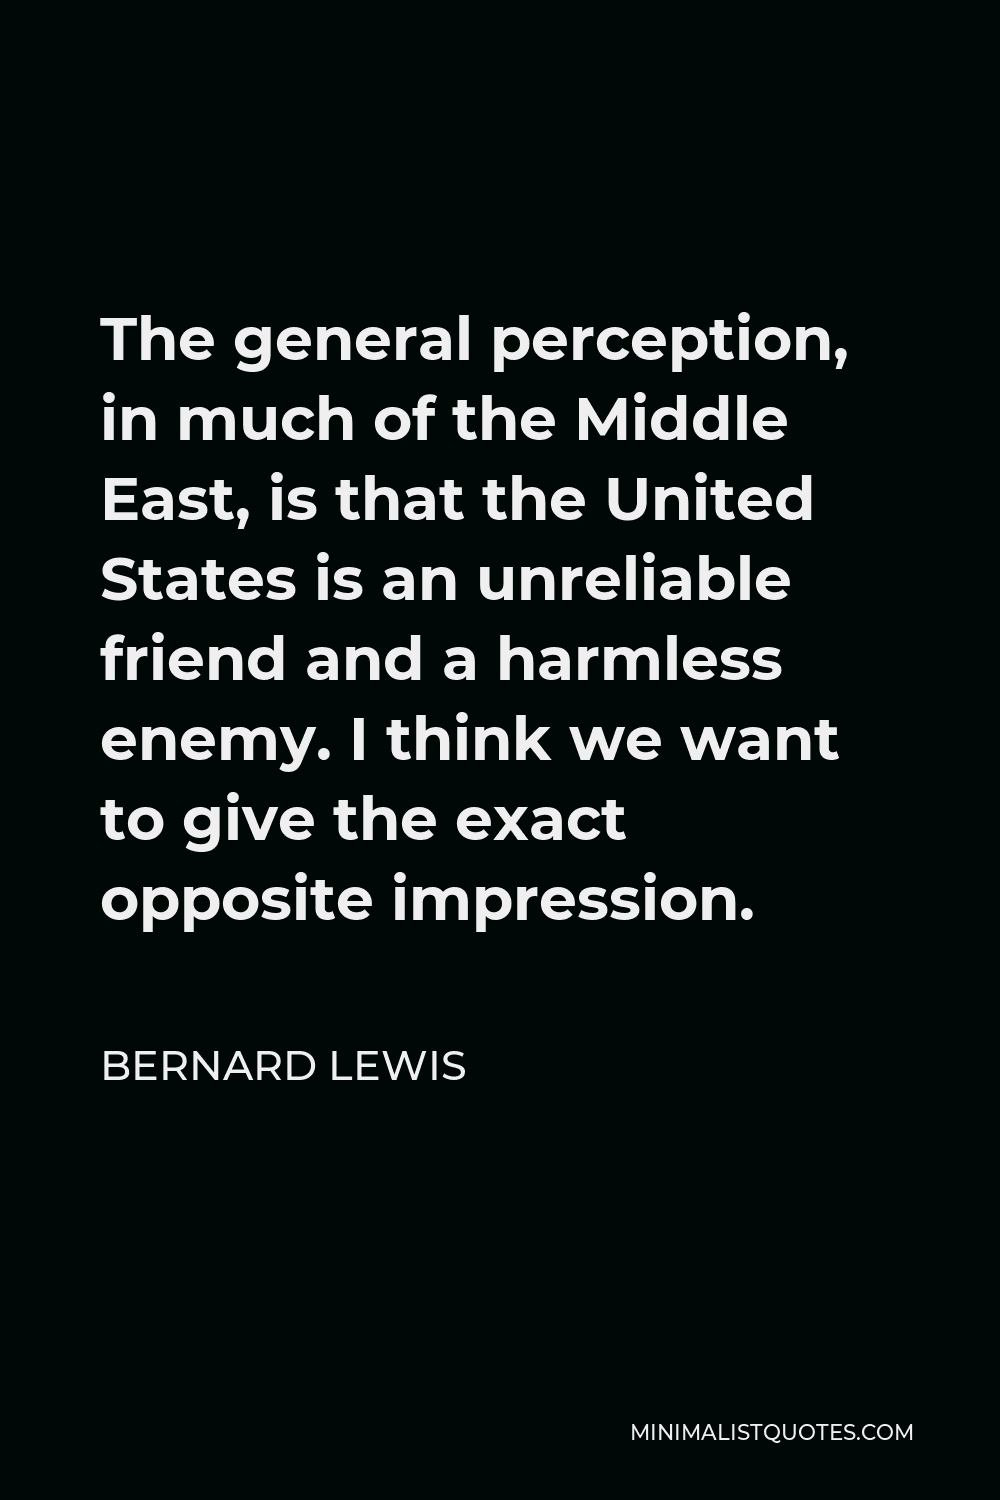 Bernard Lewis Quote - The general perception, in much of the Middle East, is that the United States is an unreliable friend and a harmless enemy. I think we want to give the exact opposite impression.